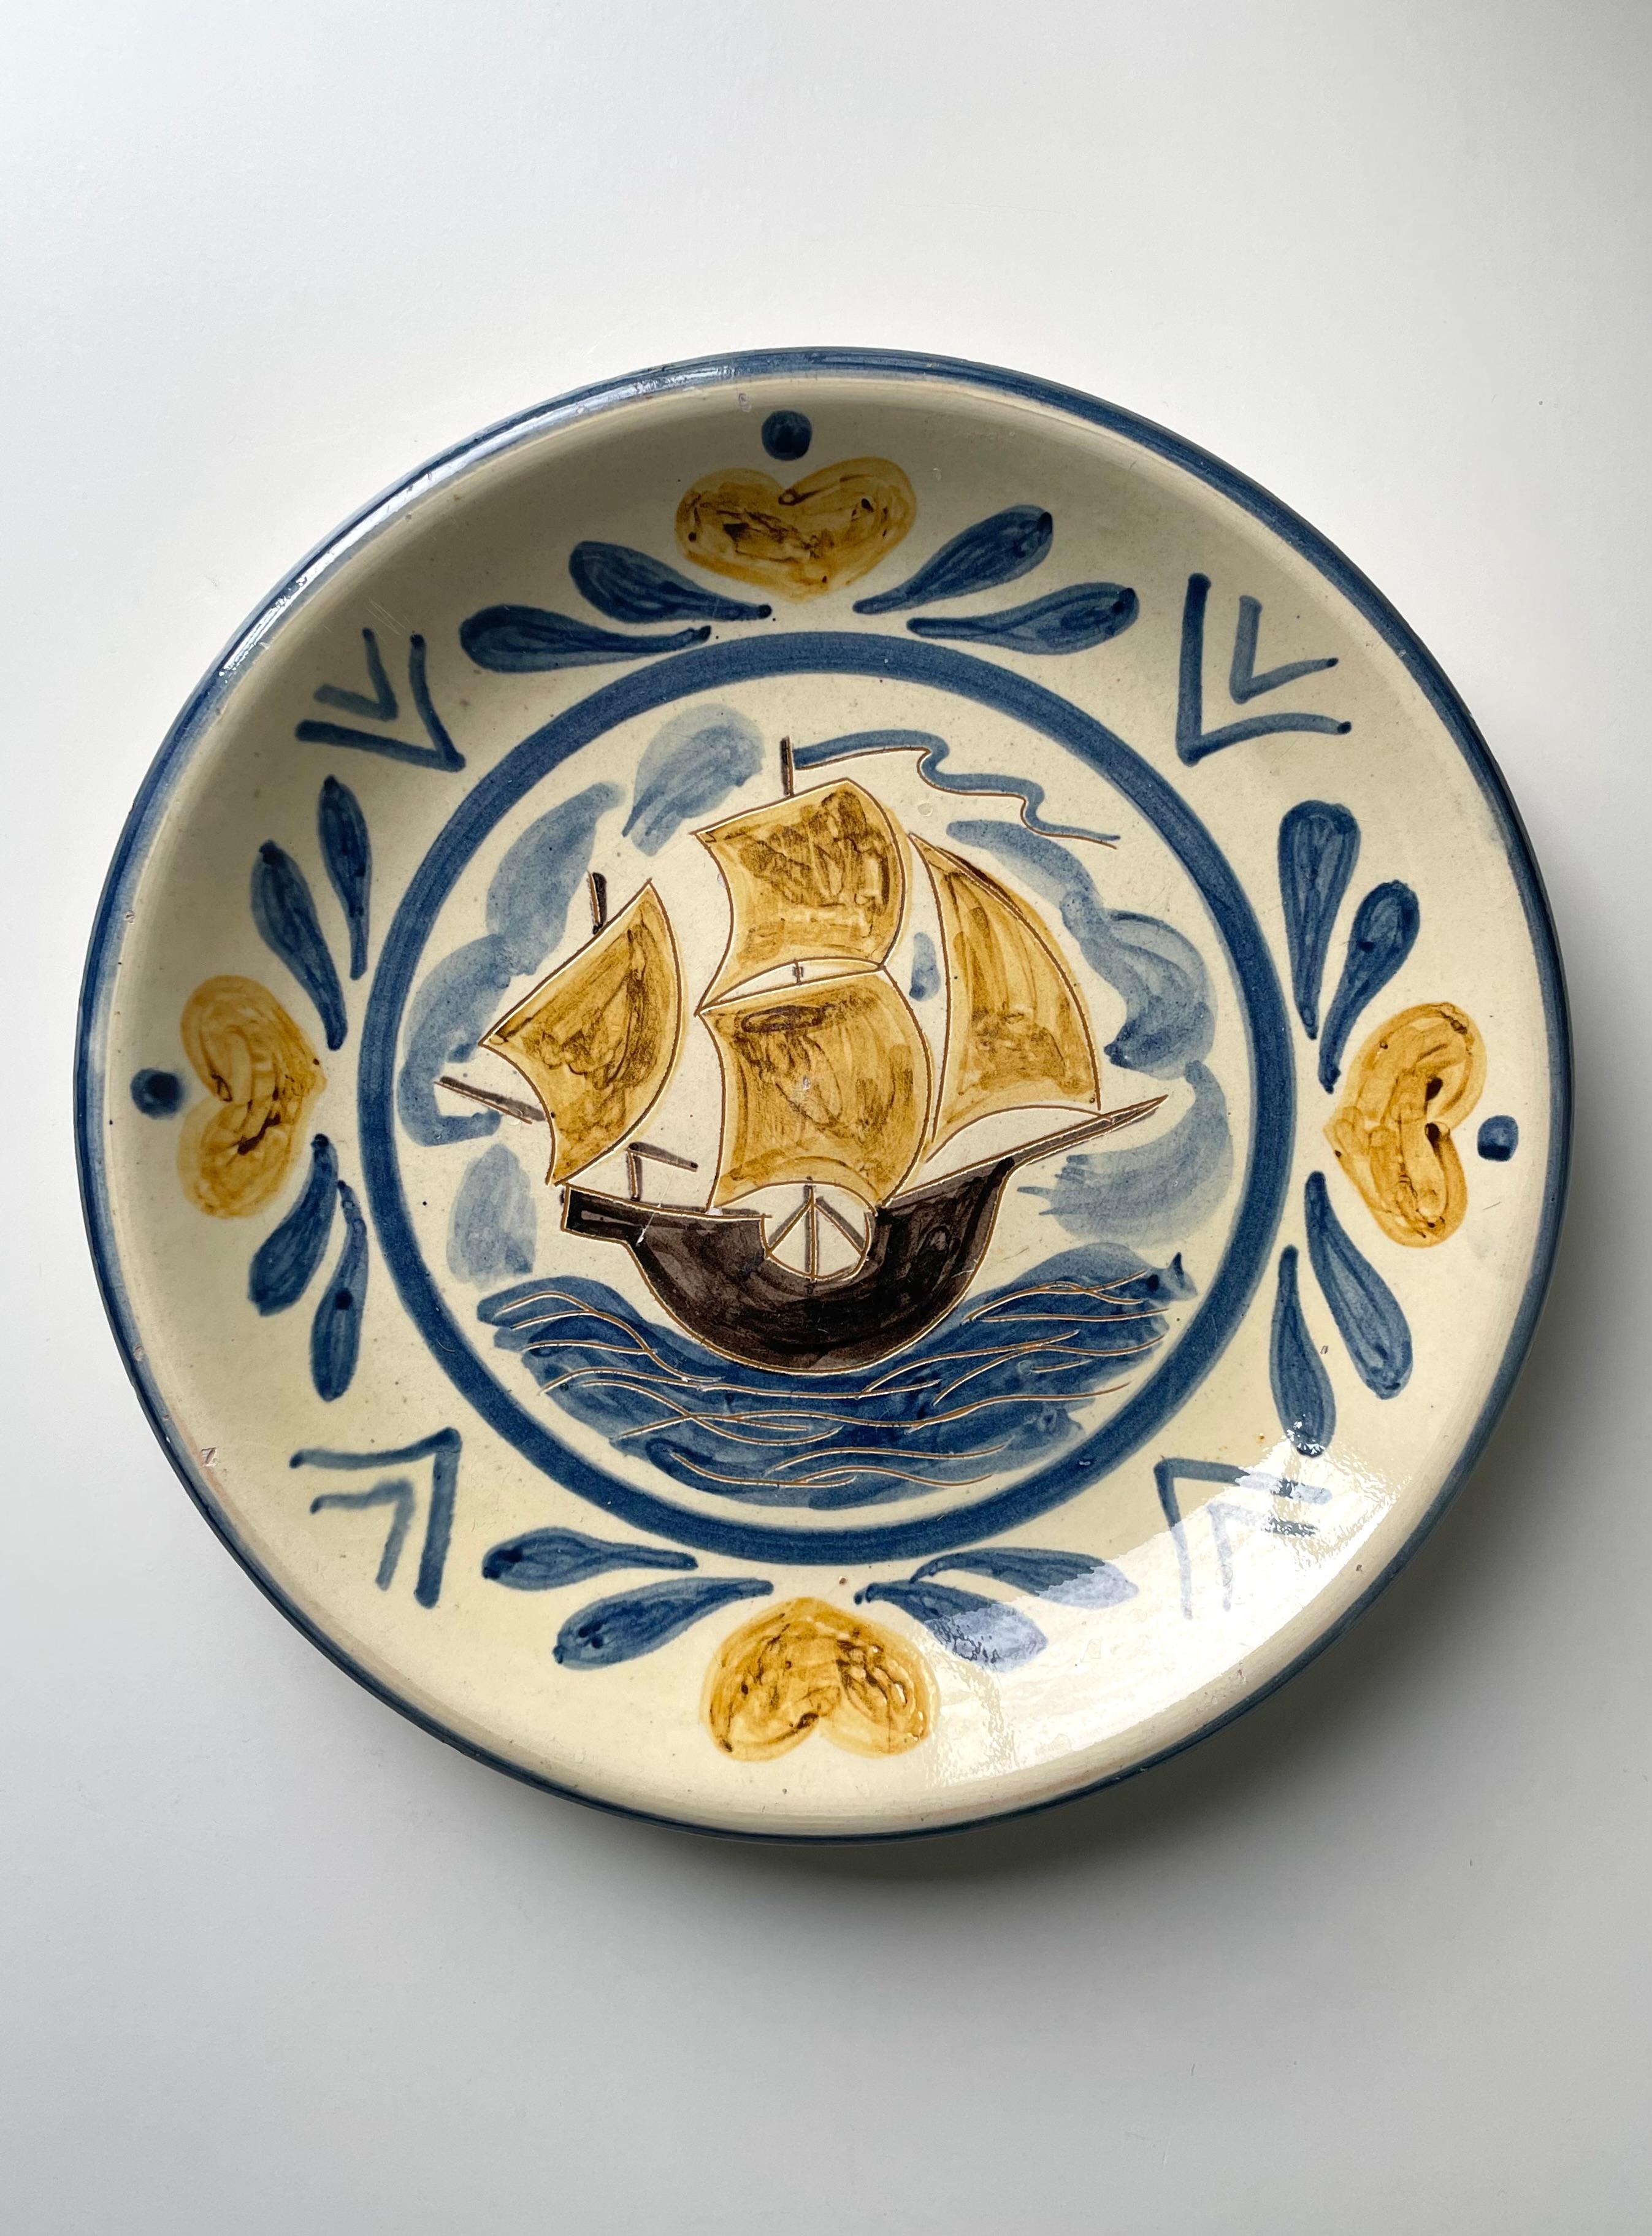 Large Danish early midcentury decorative centerpiece dish handmade in the 1940s at Humlebæk Keramik in the small town of Espergærde in northern Zealand. Cream yellow base with hand-painted dark brown ship with warm yellow sails on wavy blue seas and